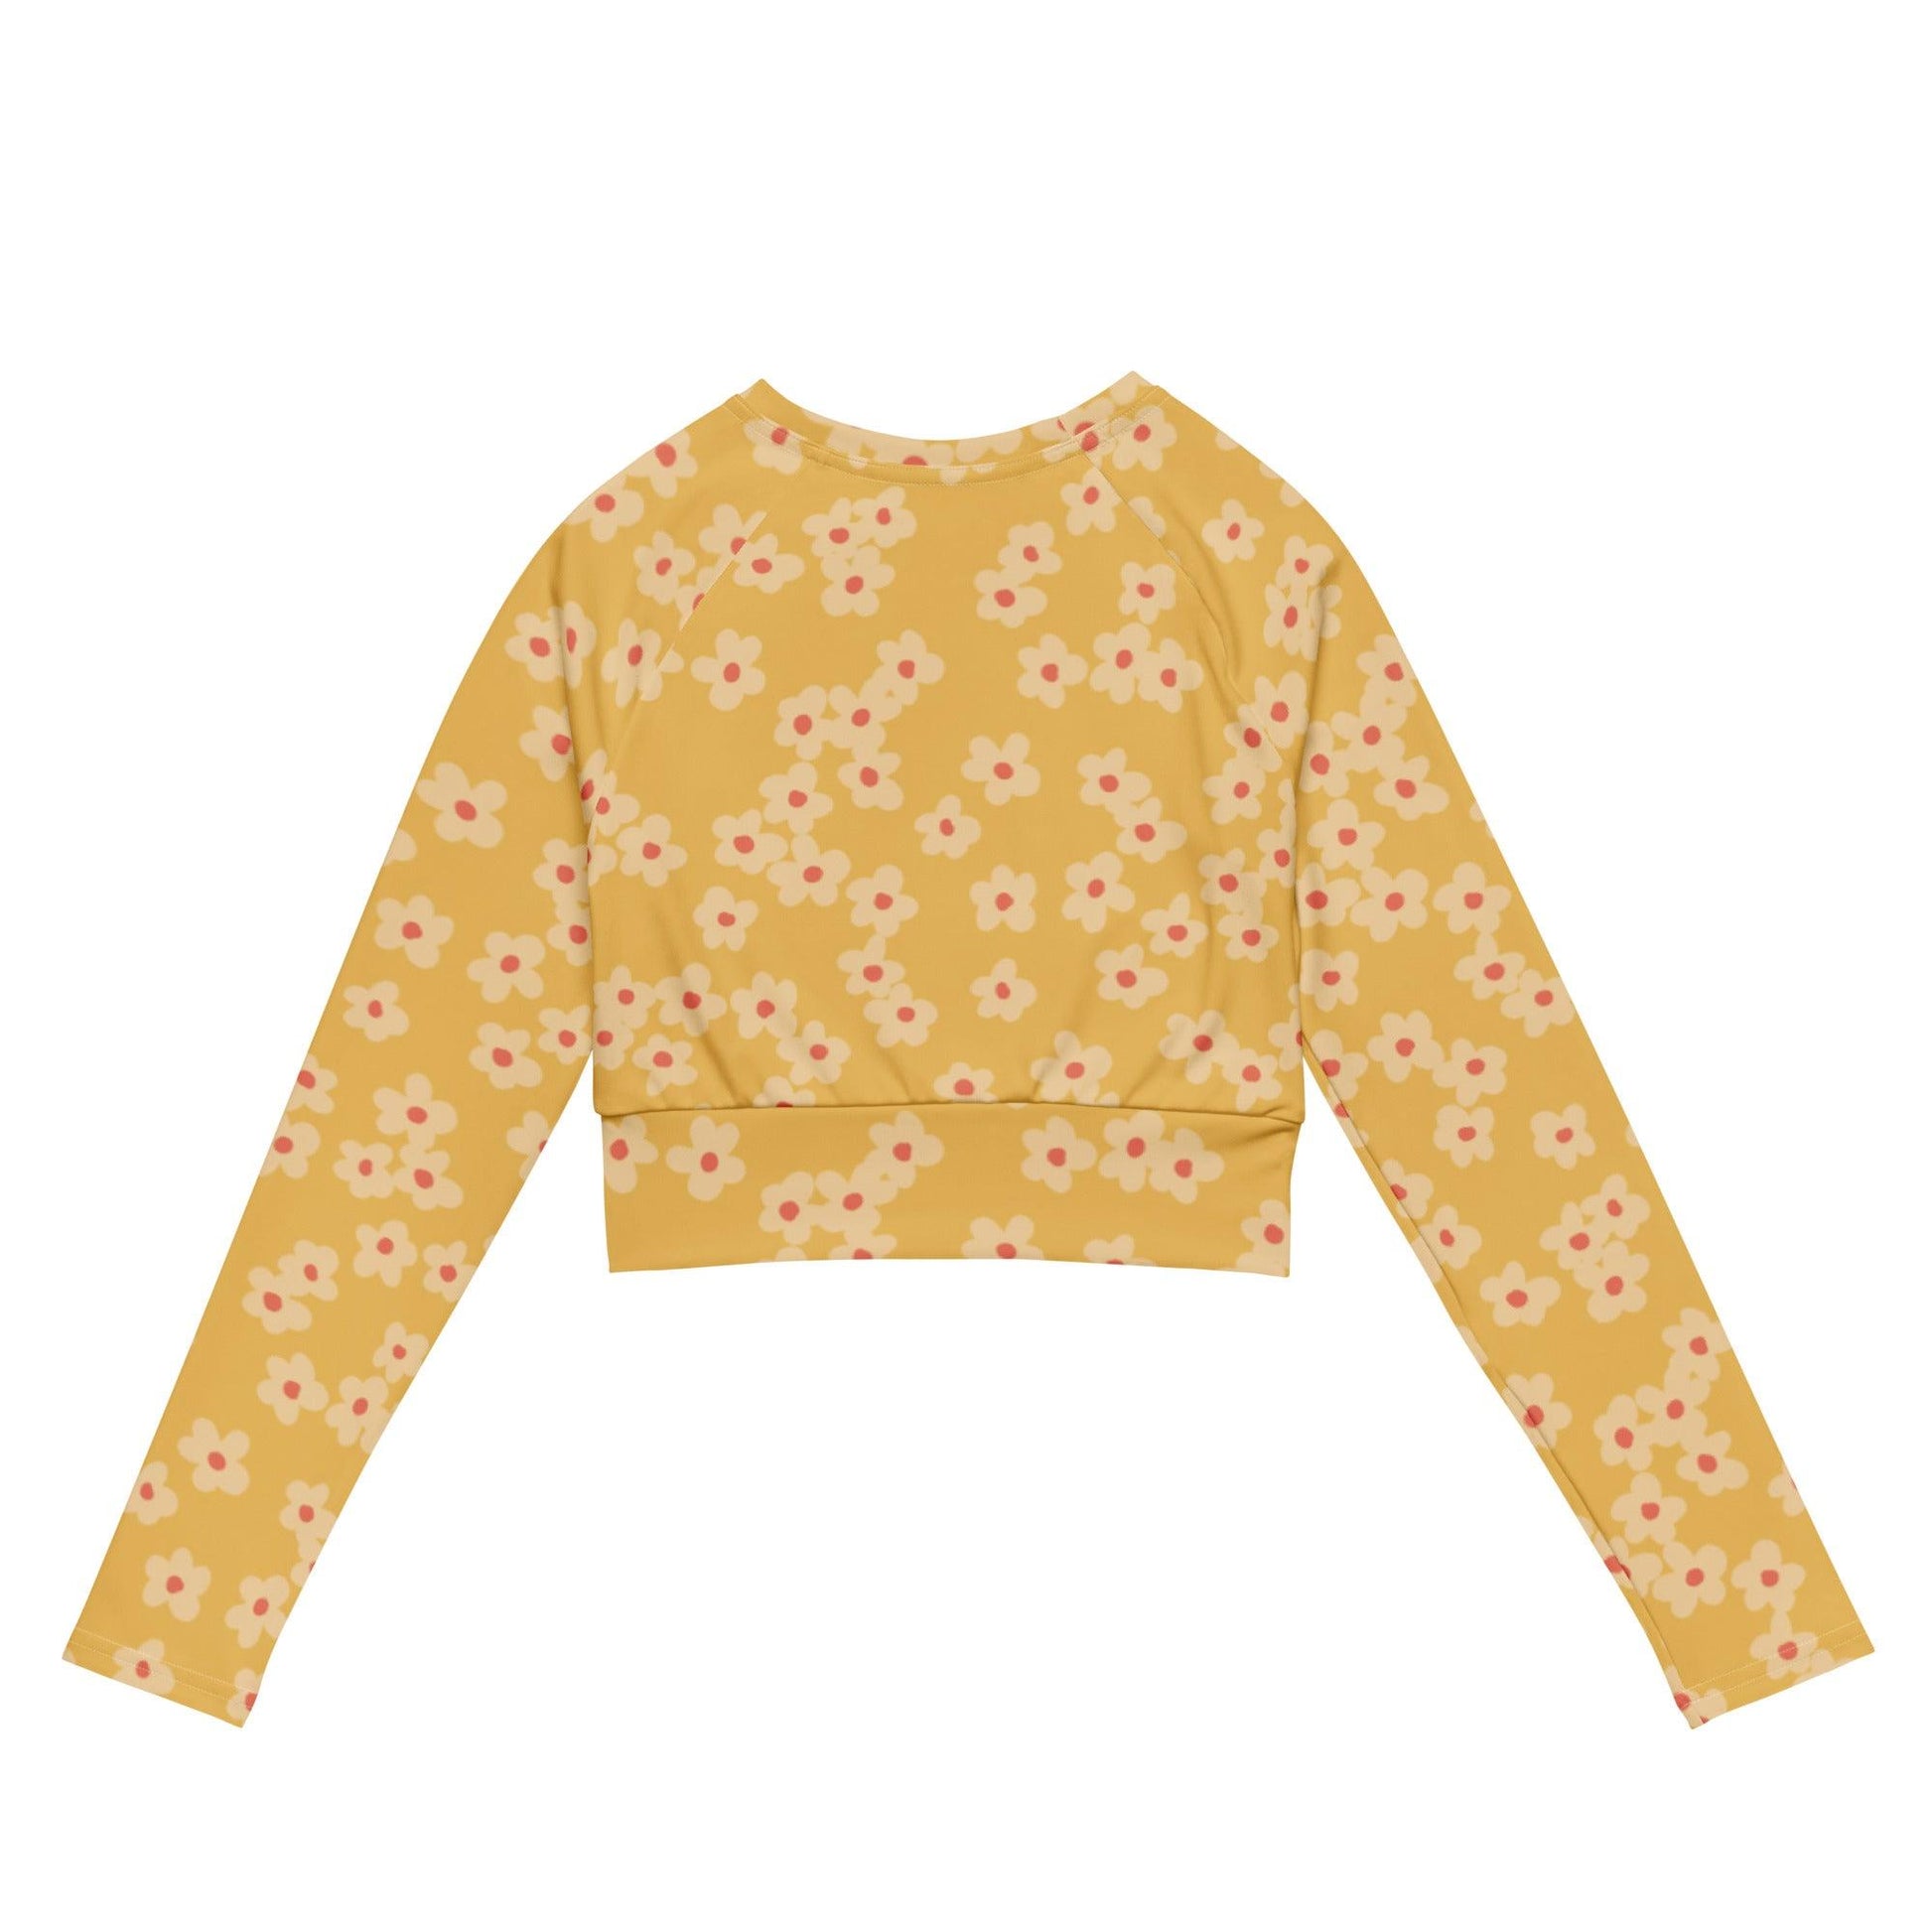 Sunny Blooms Long Sleeved Crop Top Rash Guard - Solshine and Co